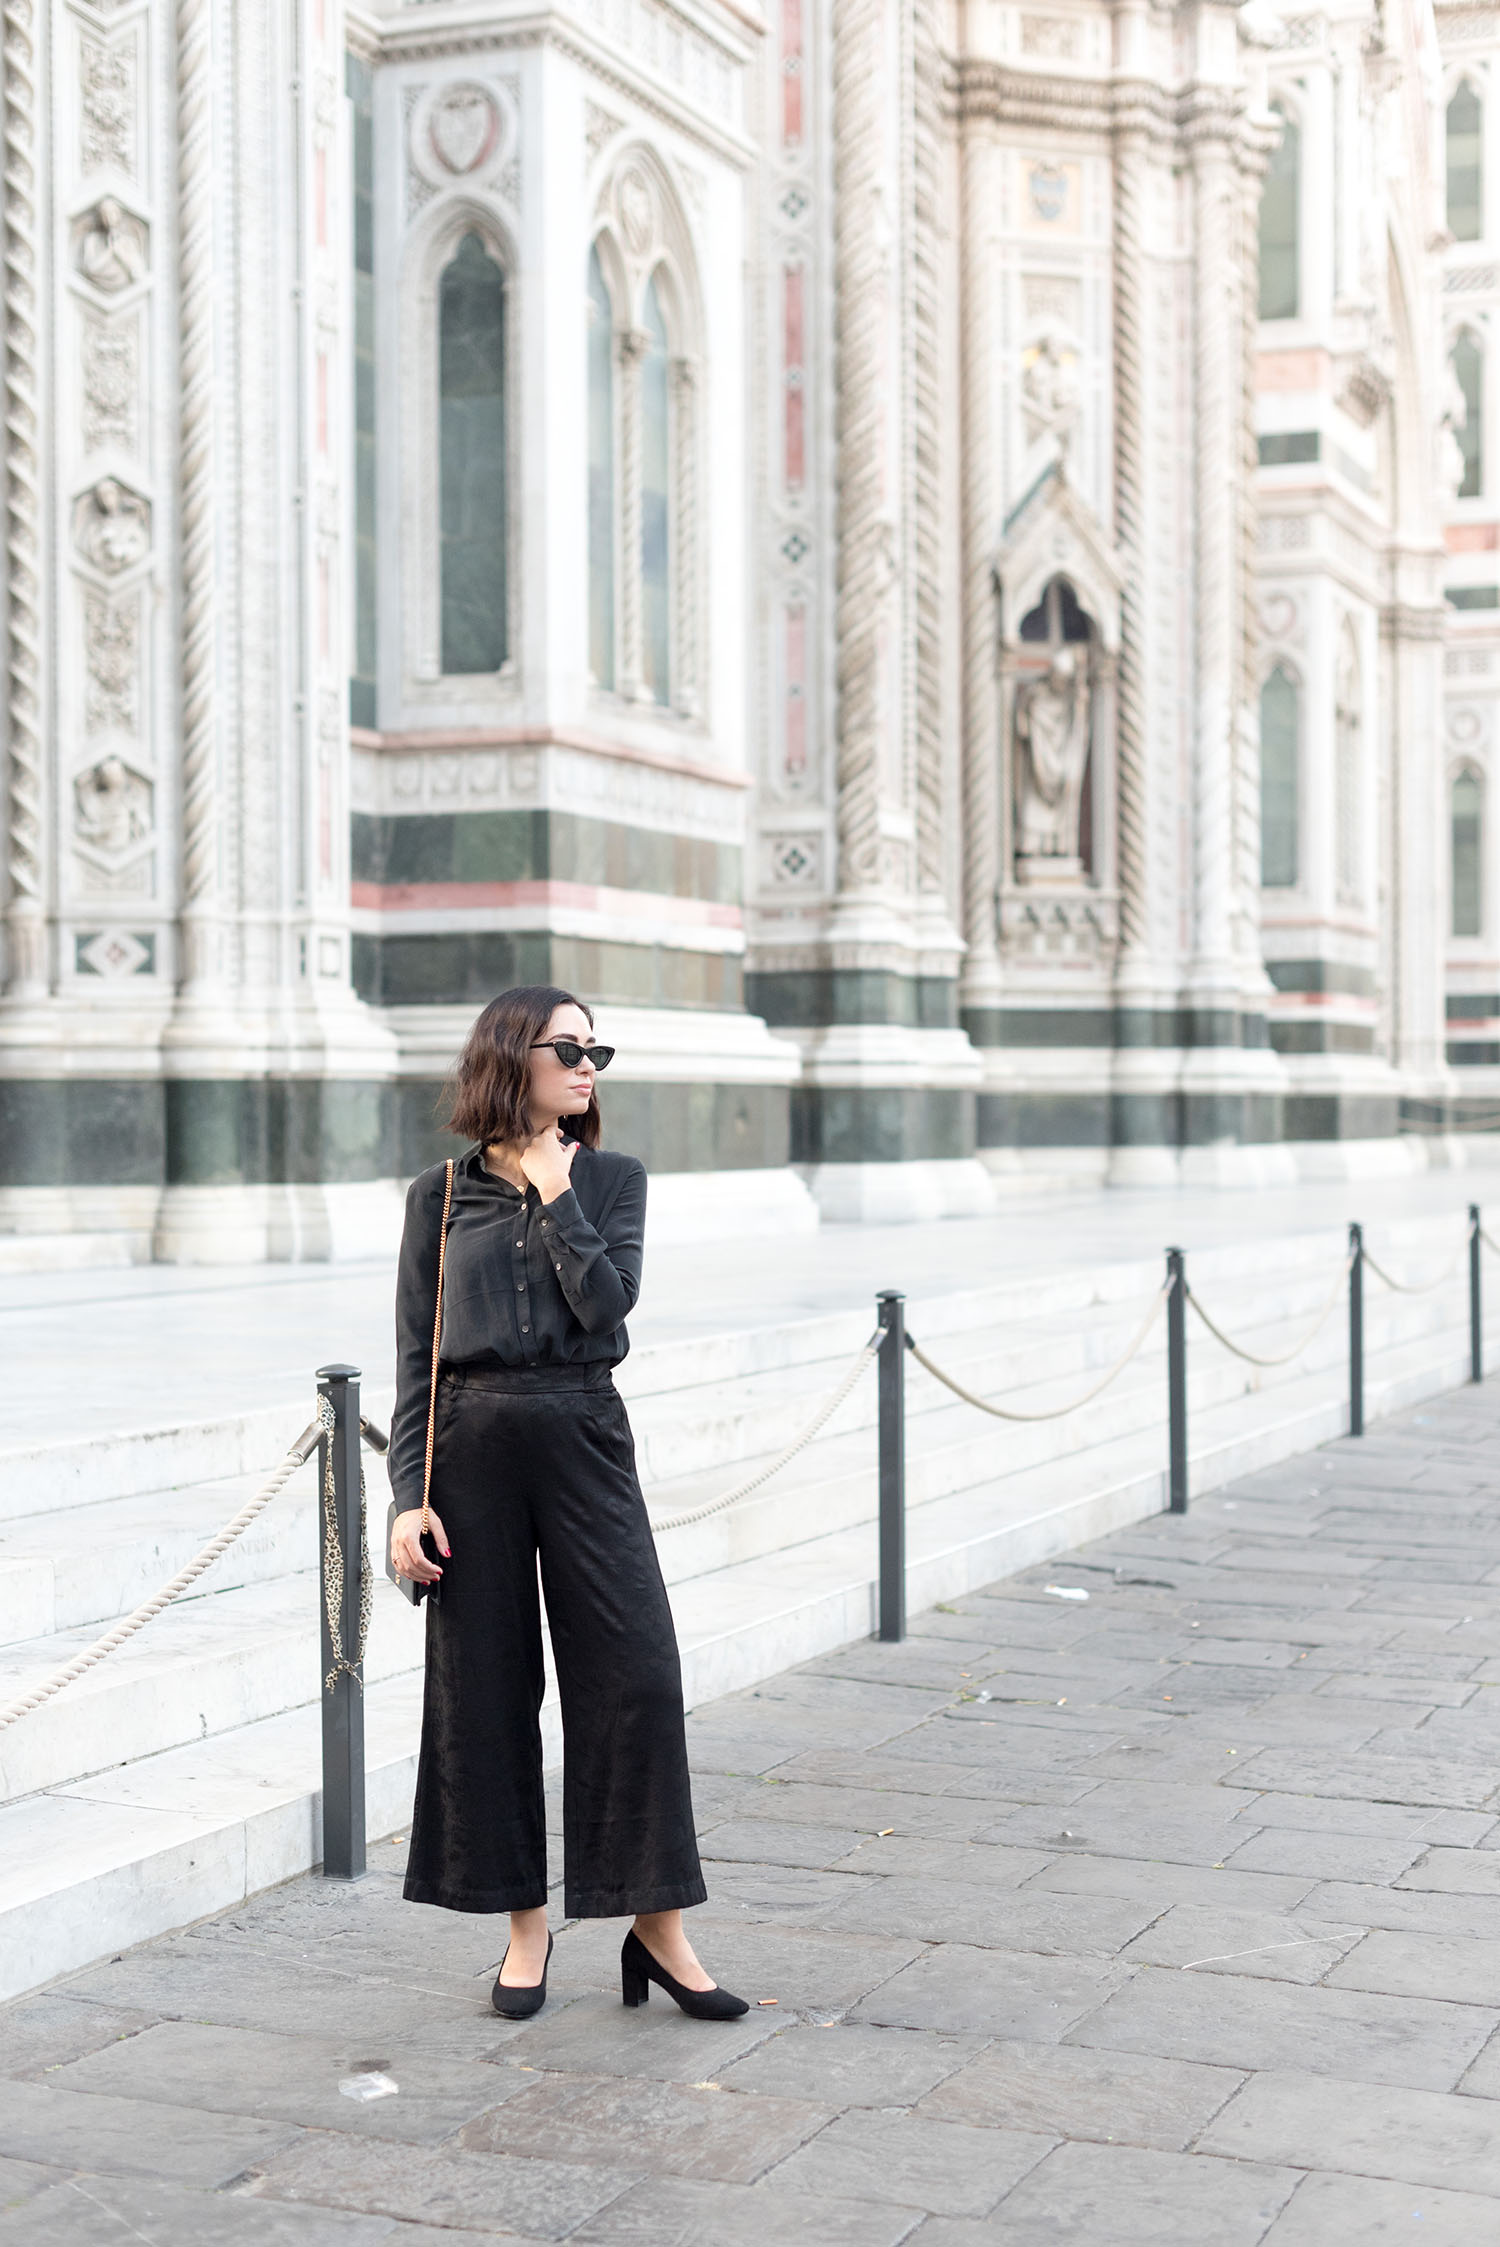 Top Winnipeg fashion blogger Cee Fardoe of Coco & Vera stands outside the Duomo in Florence, Italy, wearing Aritzia brocade culottes and an Everlane silk blouse